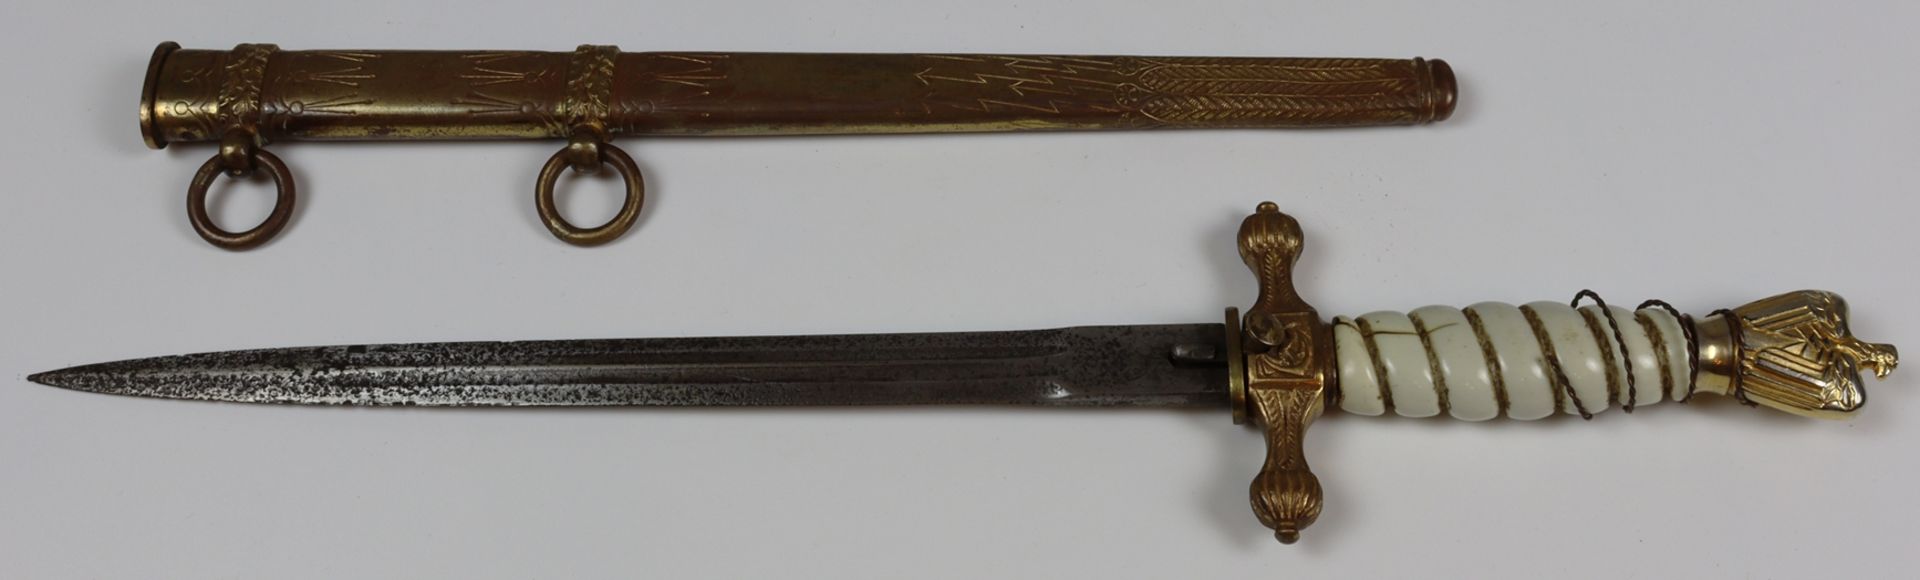 Dagger of the Kriegsmarine of the 3. Reich, 1933-1945 - Image 4 of 7